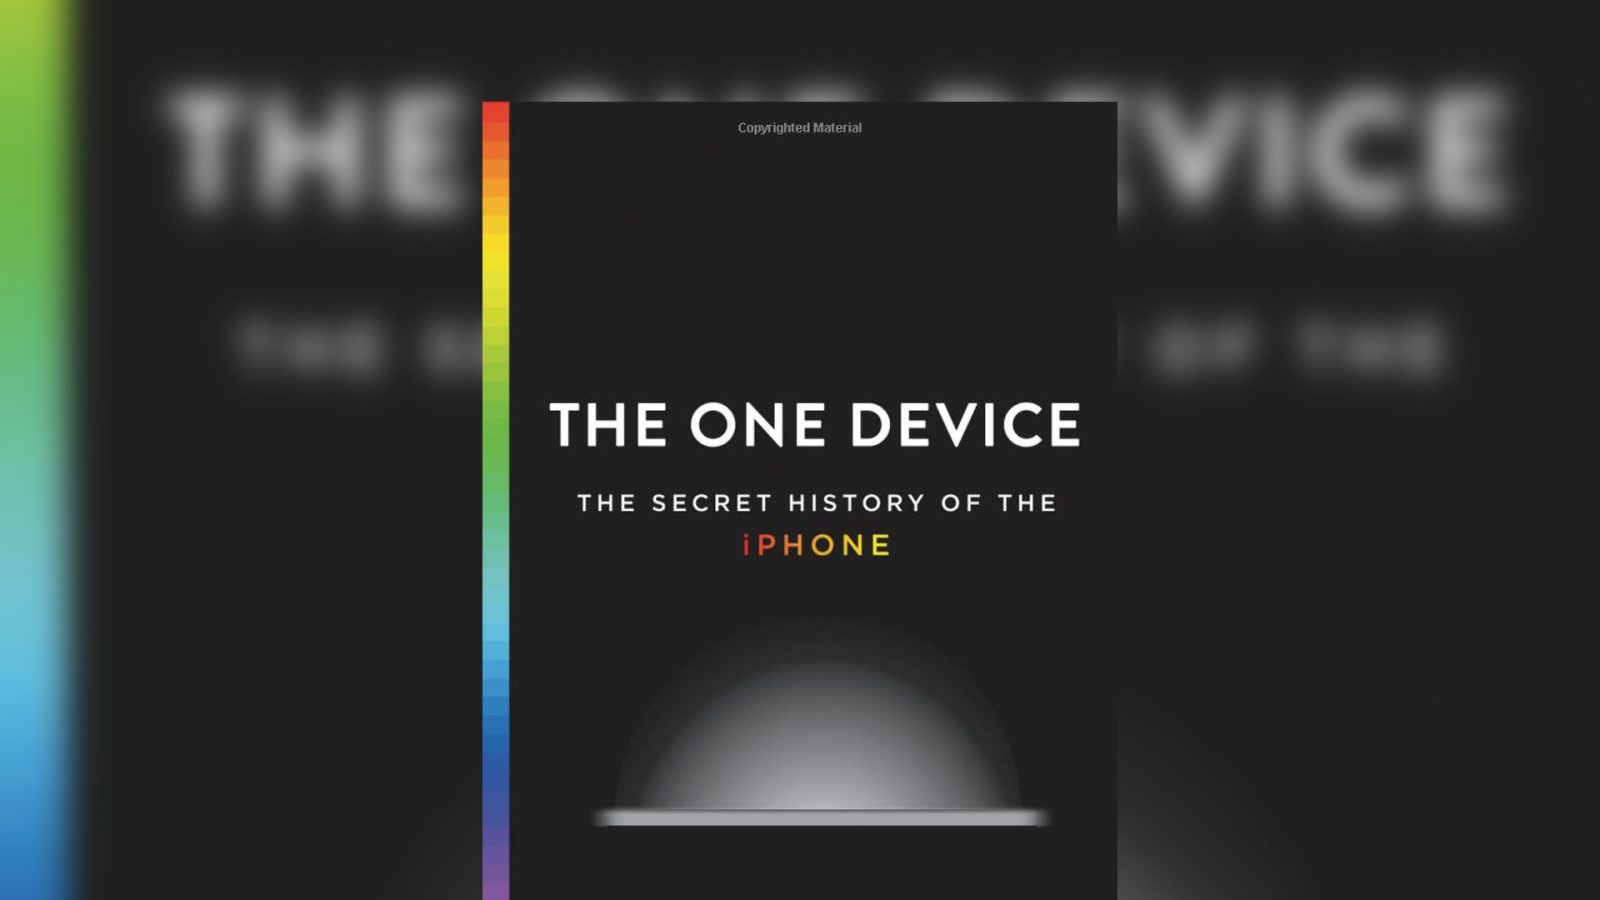 Device 01. The one device. Devices книга. The one книга. The one device book.